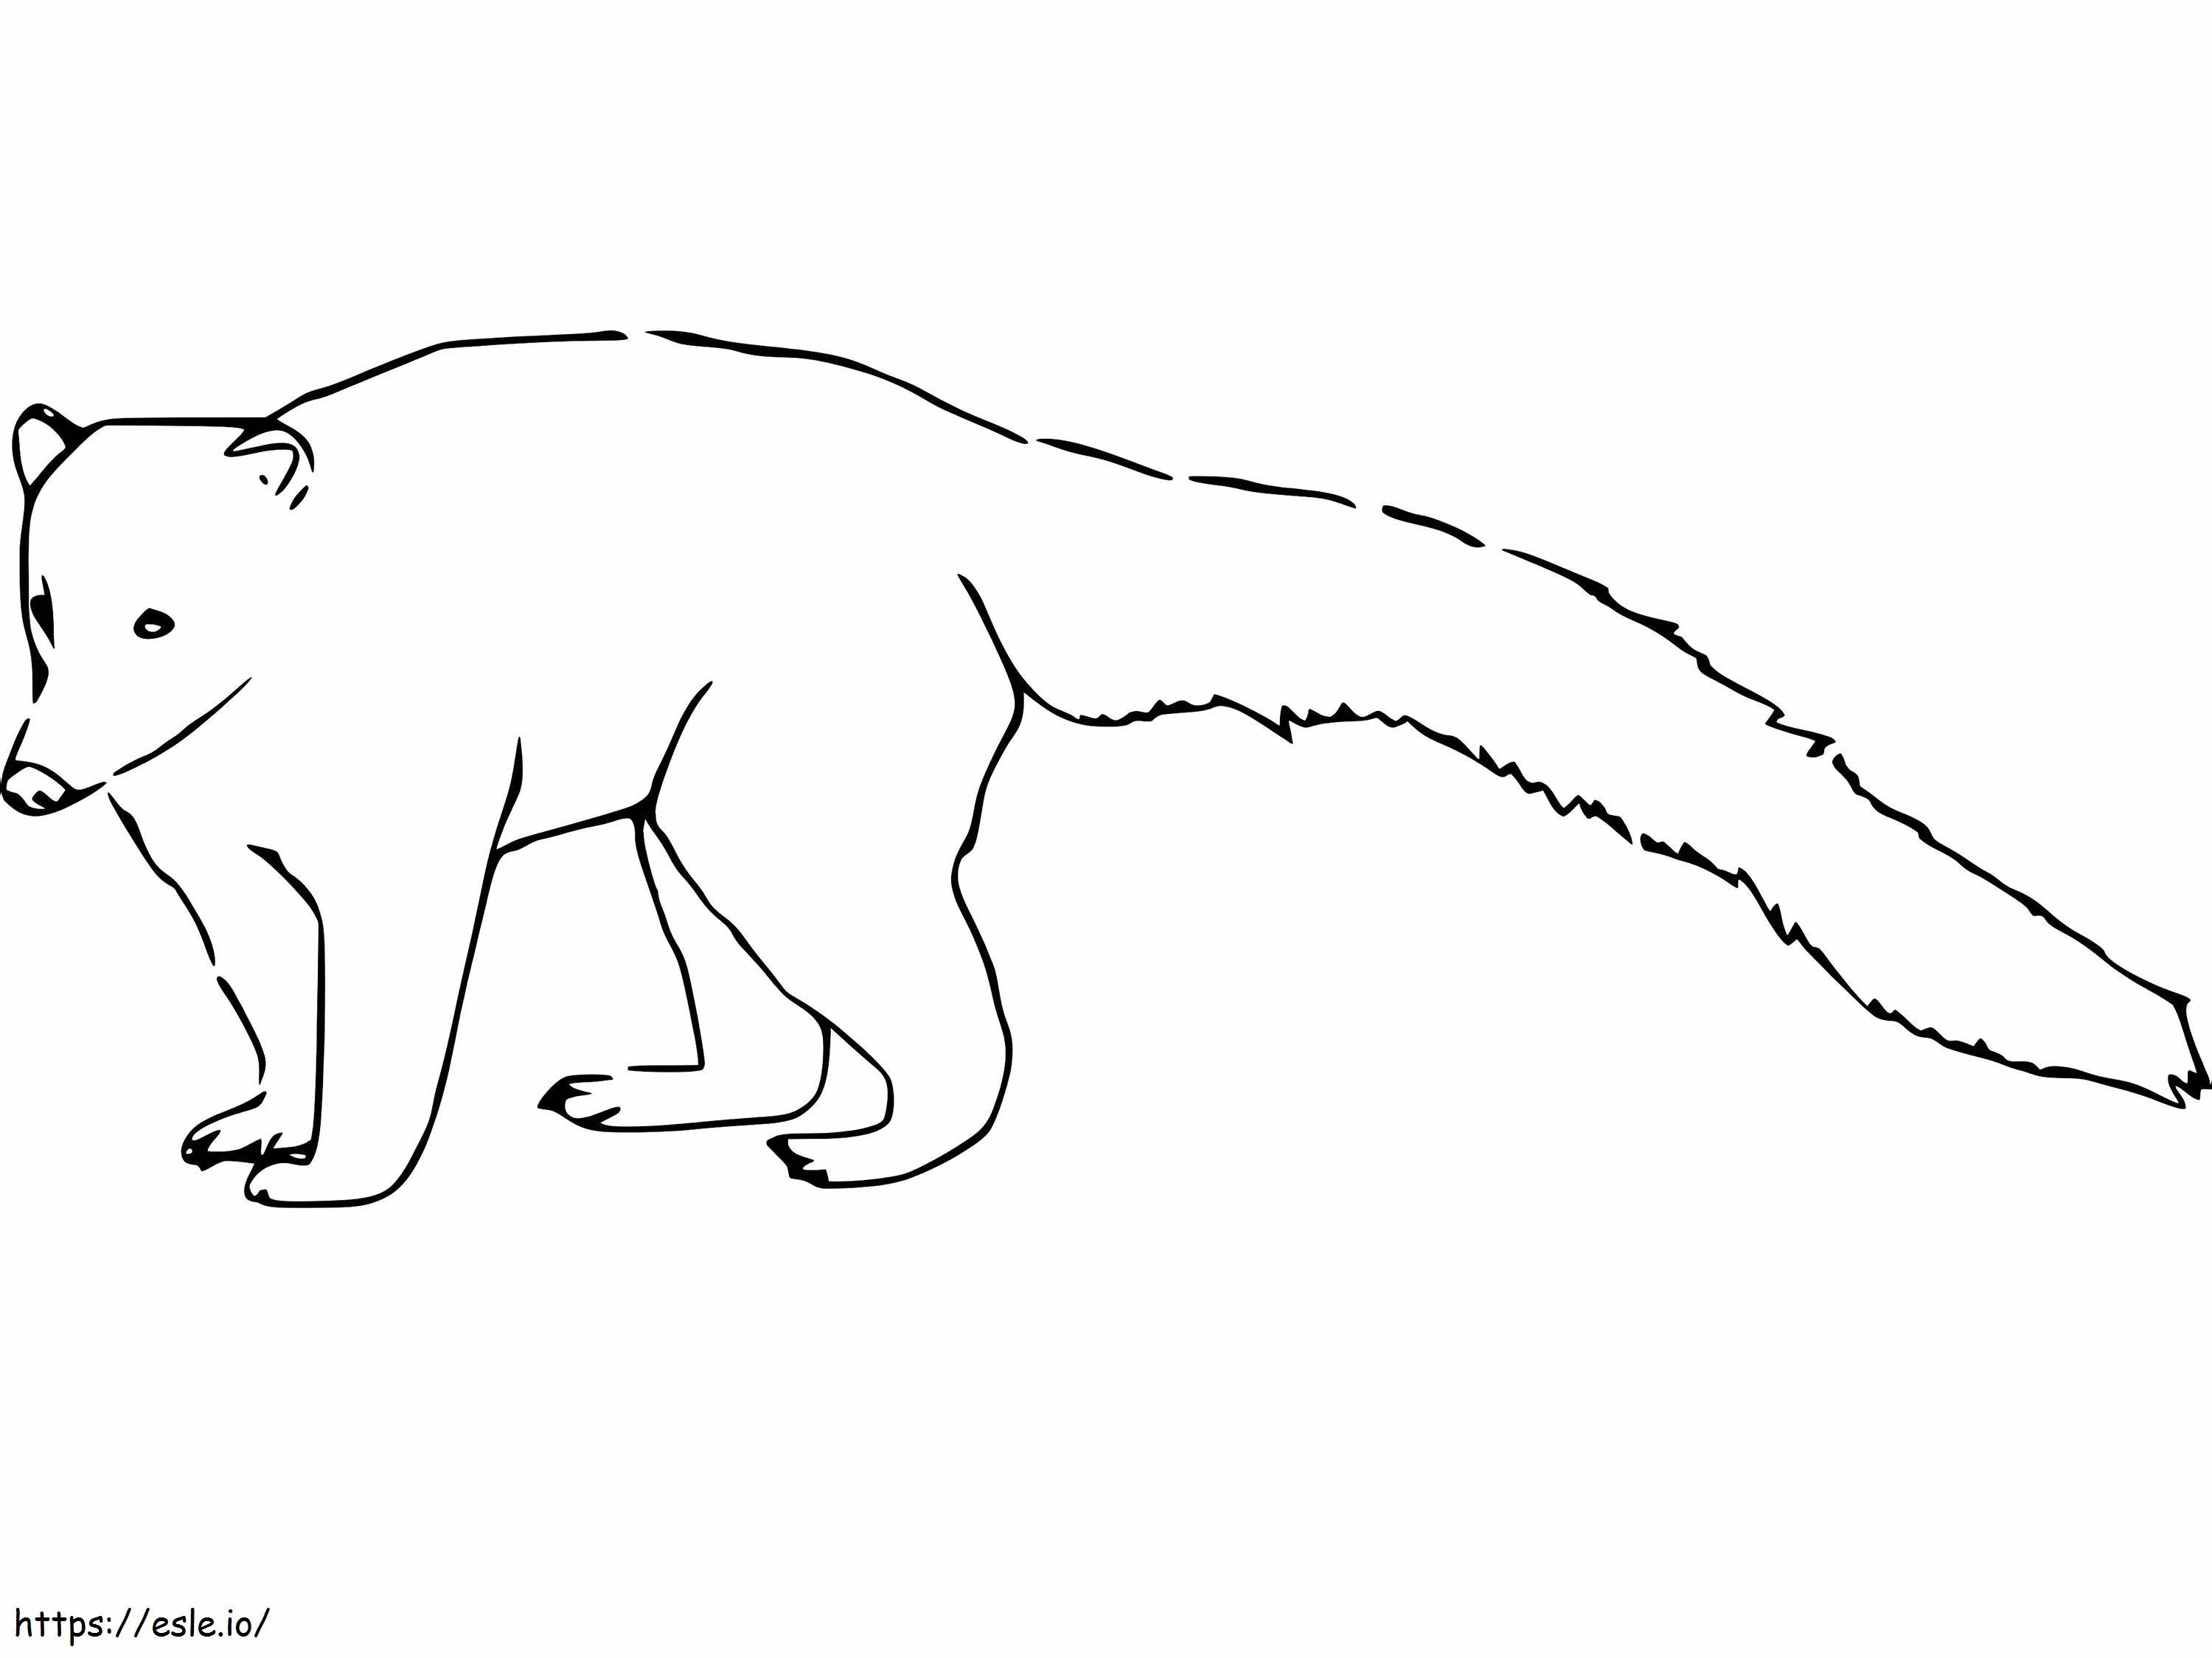 Simple Coat coloring page